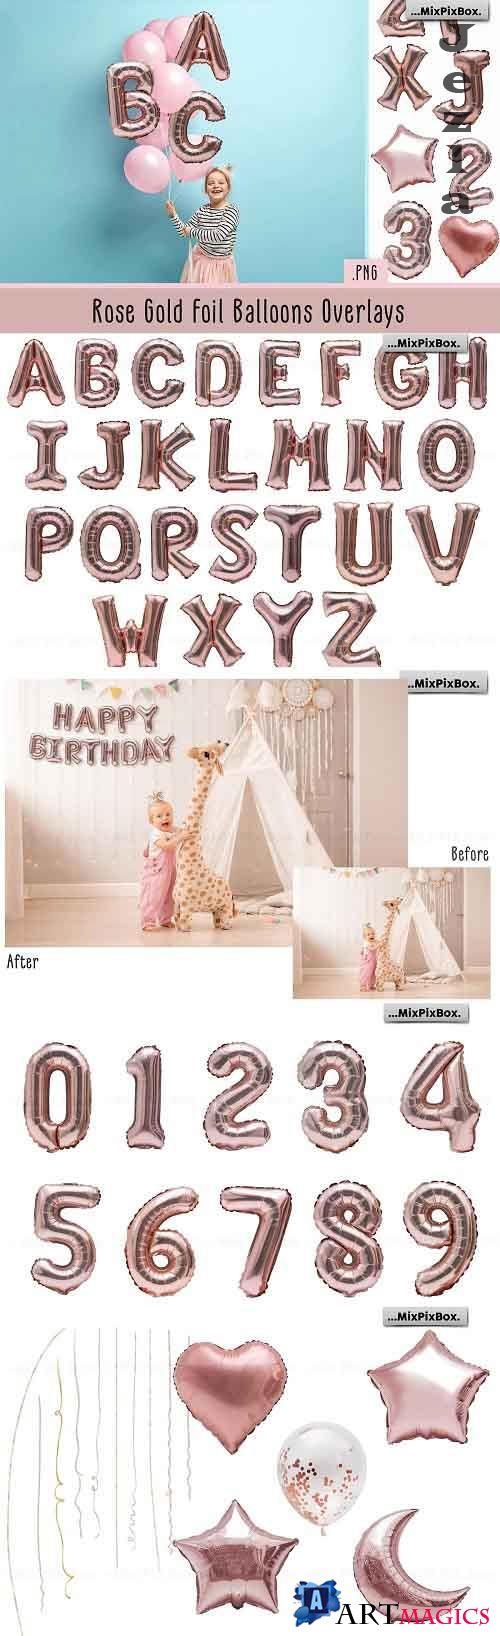 Rose Gold Foil Balloons Overlays - 4978844